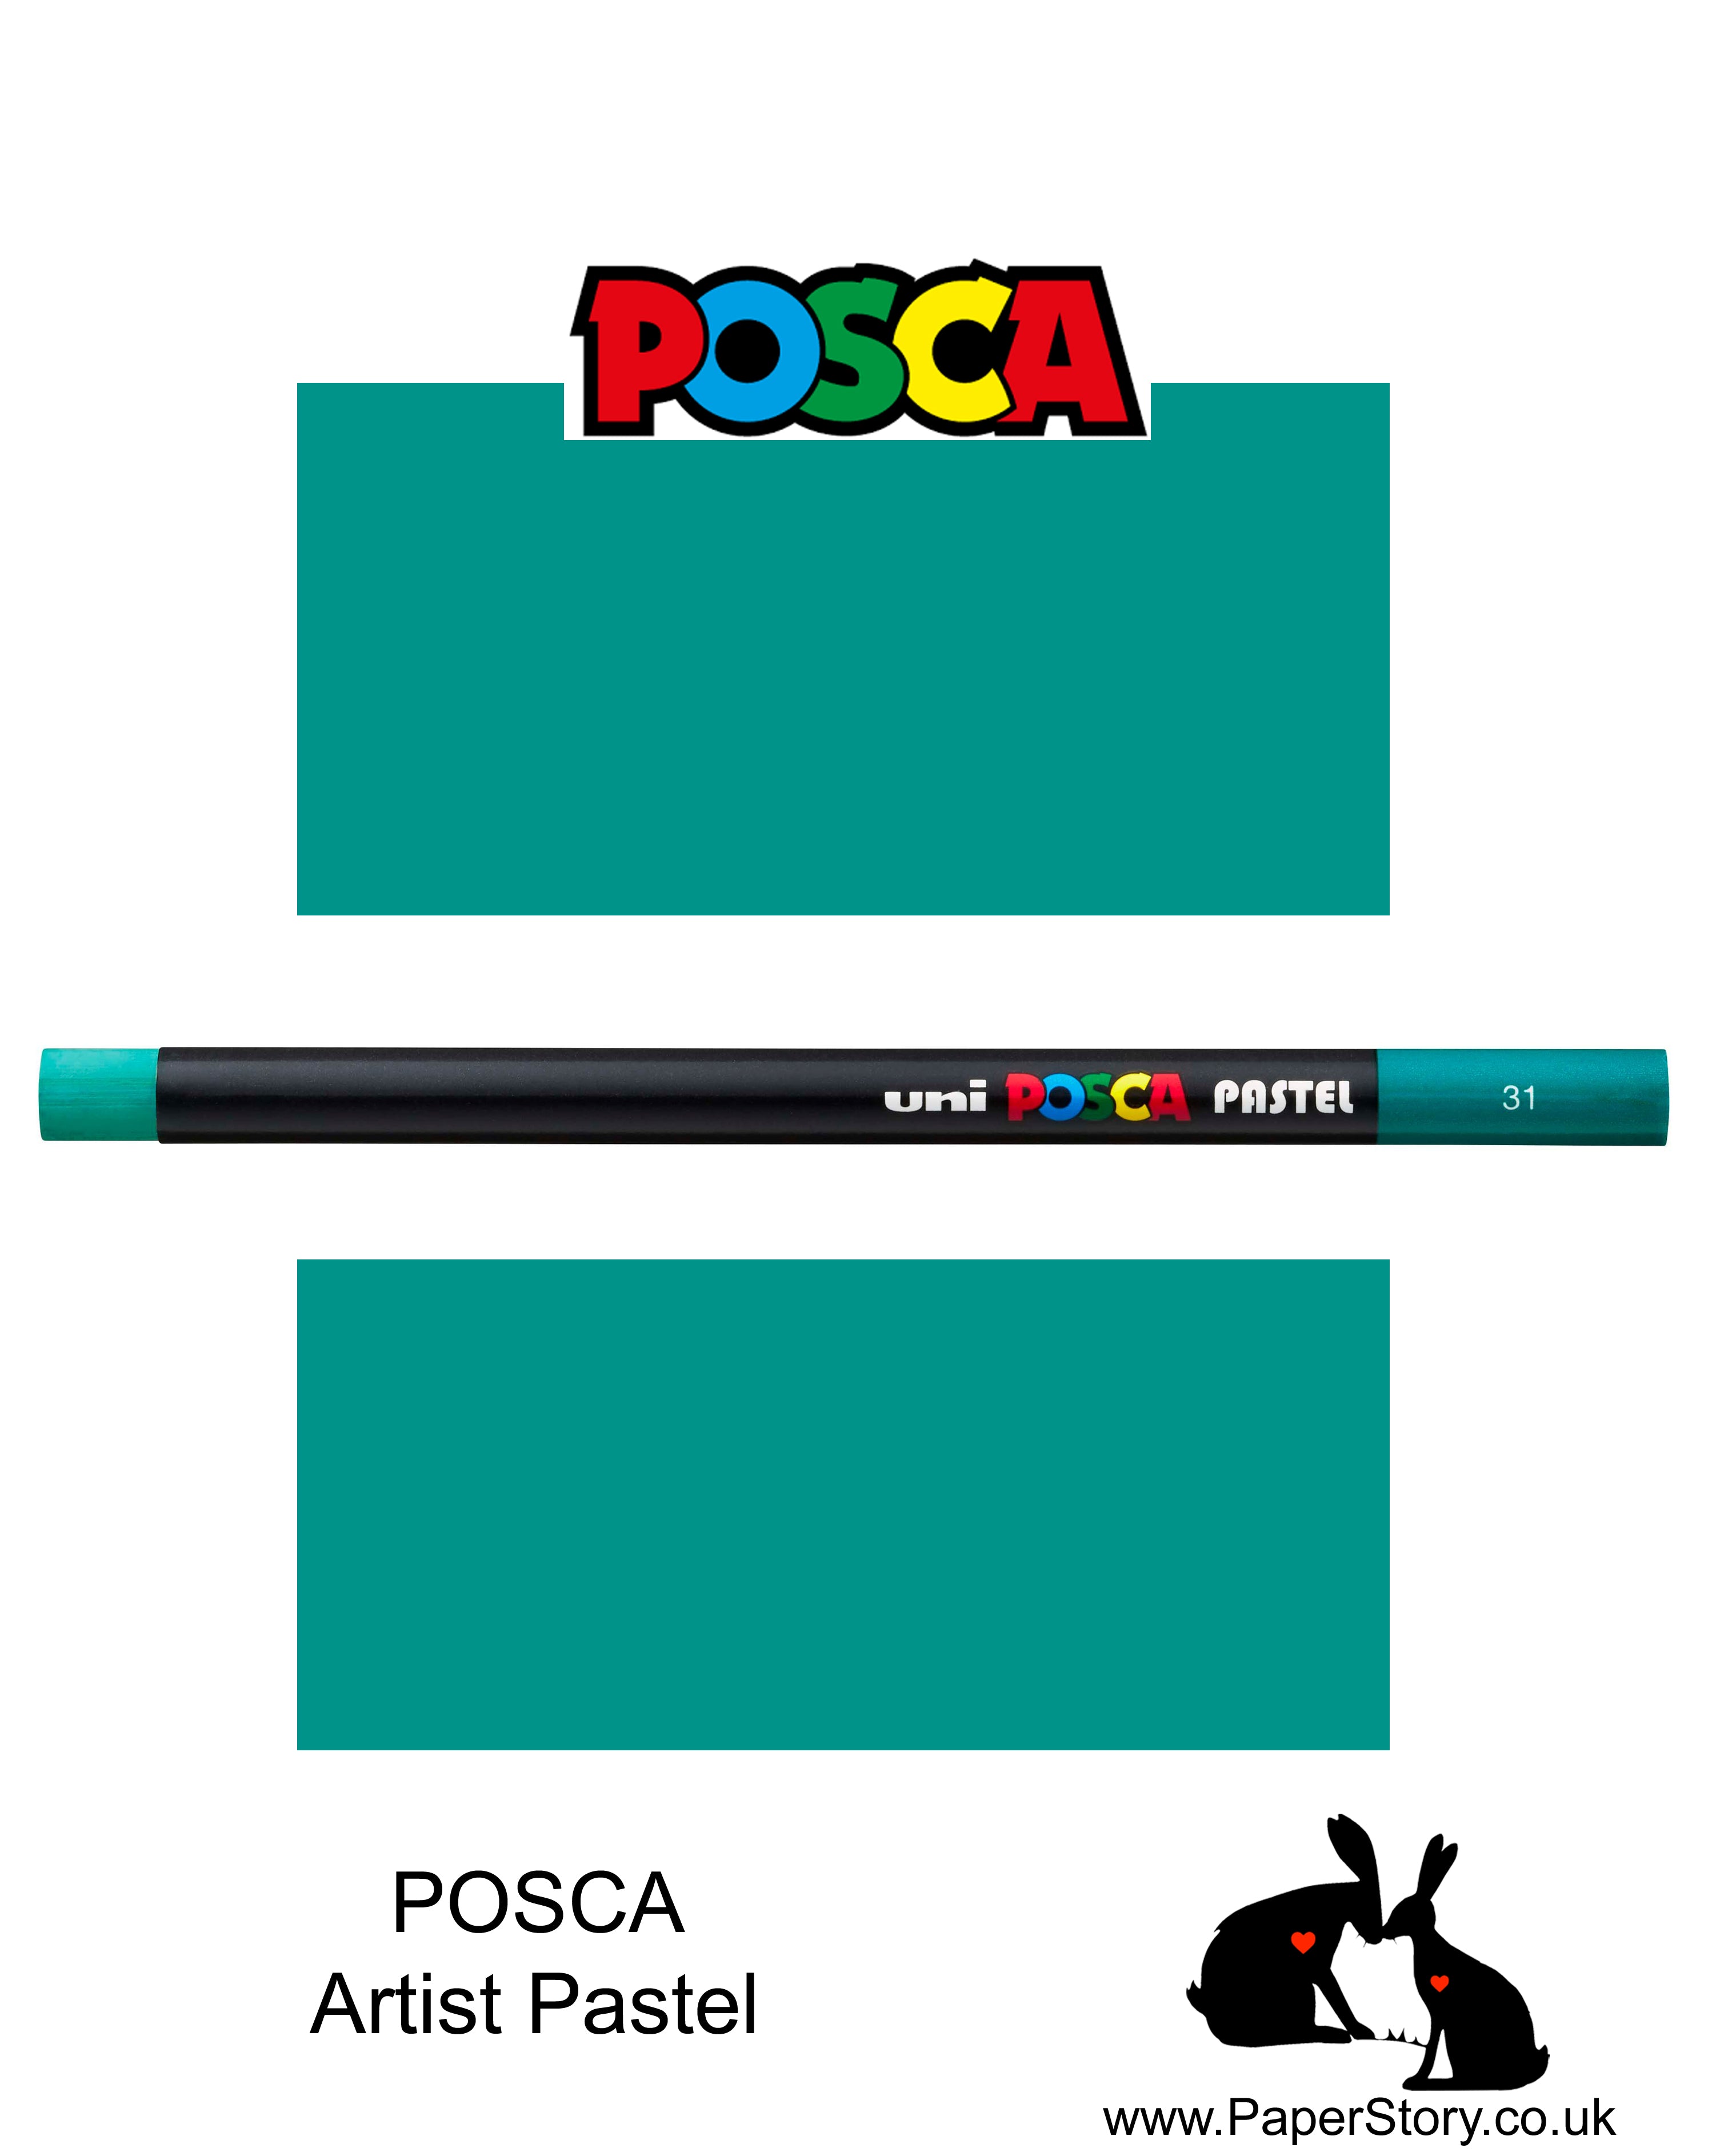 New Uni POSCA Pastels, Emerald Green, these  new style wax and oil mixed pastel colours can be blended and overlaid, you can stipple, colour block, cross-hatch, scratch and outline. You can heat the sticks to create textured effects.